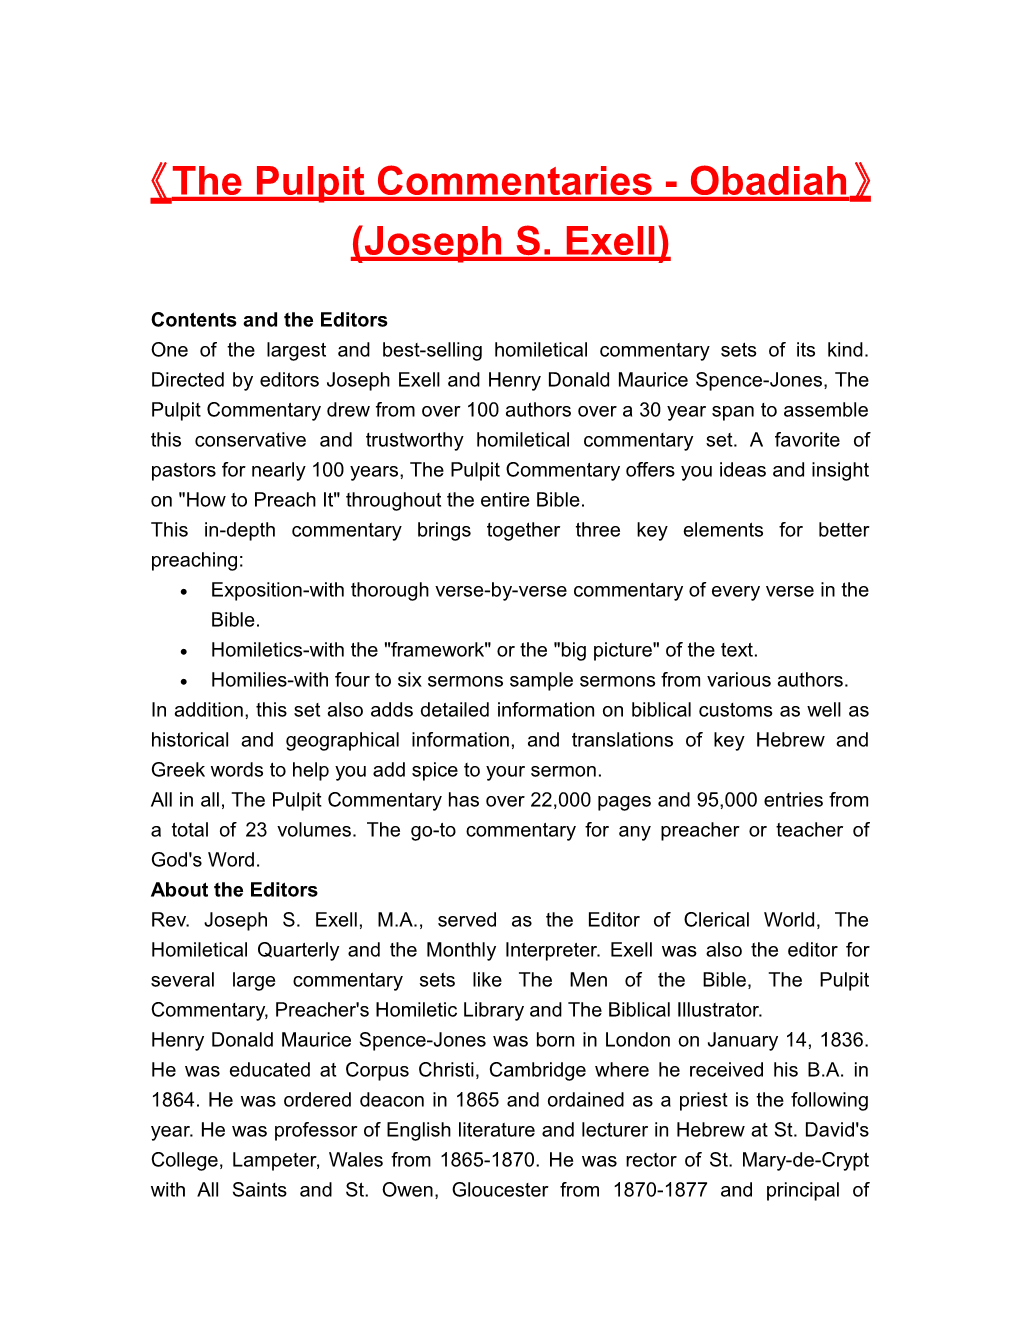 The Pulpit Commentaries- Obadiah (Joseph S. Exell)